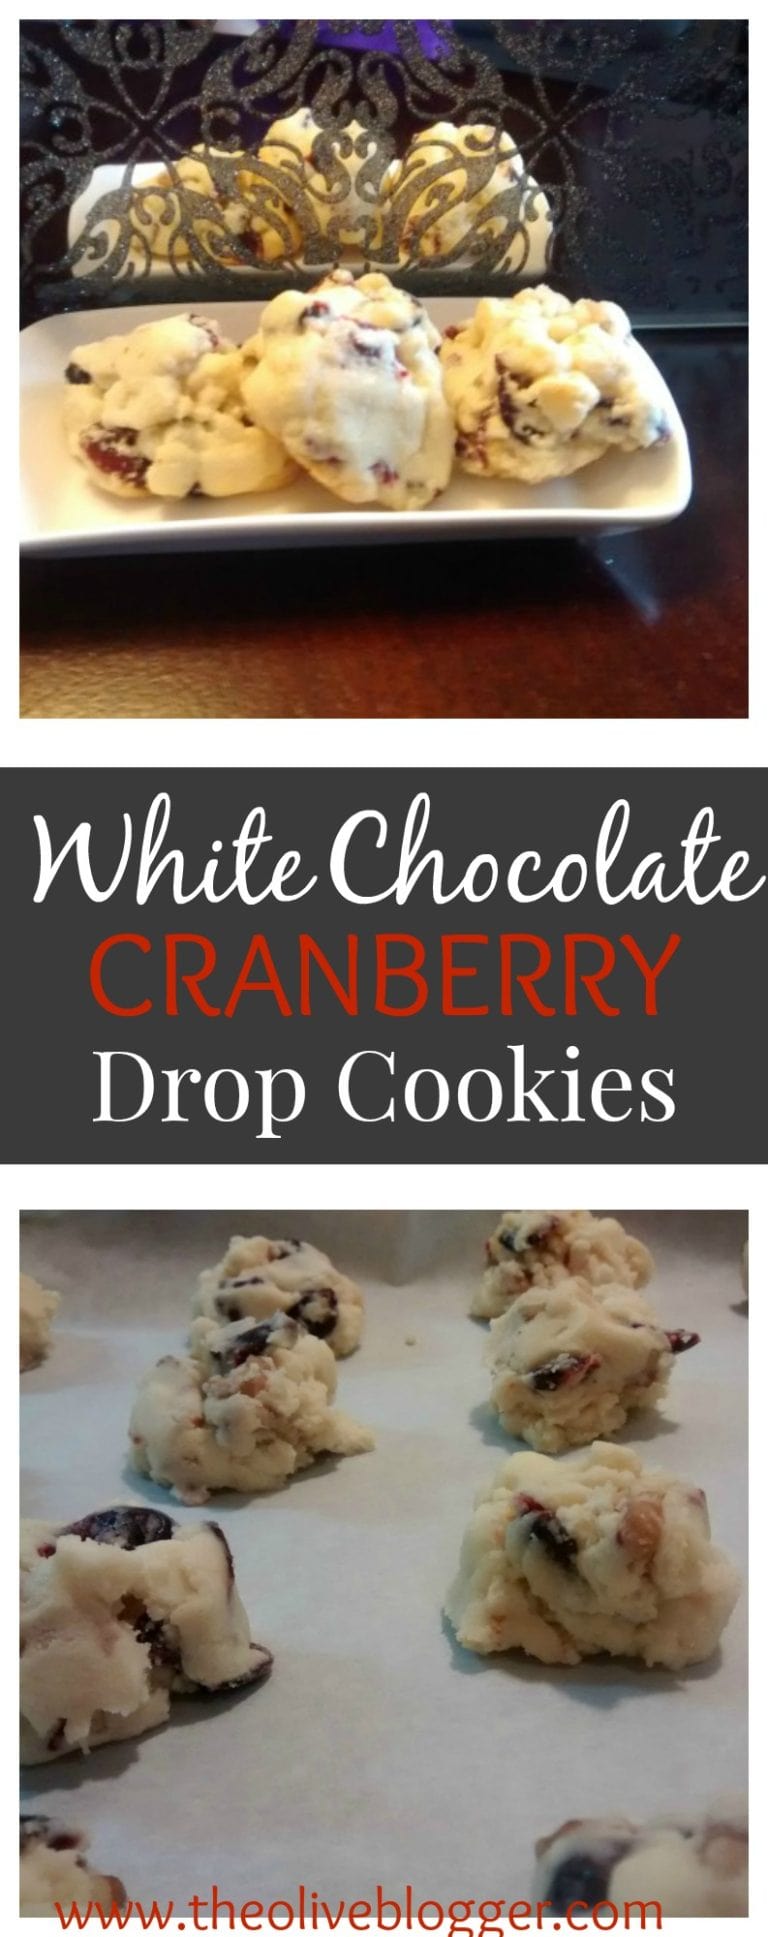 White Chocolate Cranberry Drop Cookies - The Olive Blogger